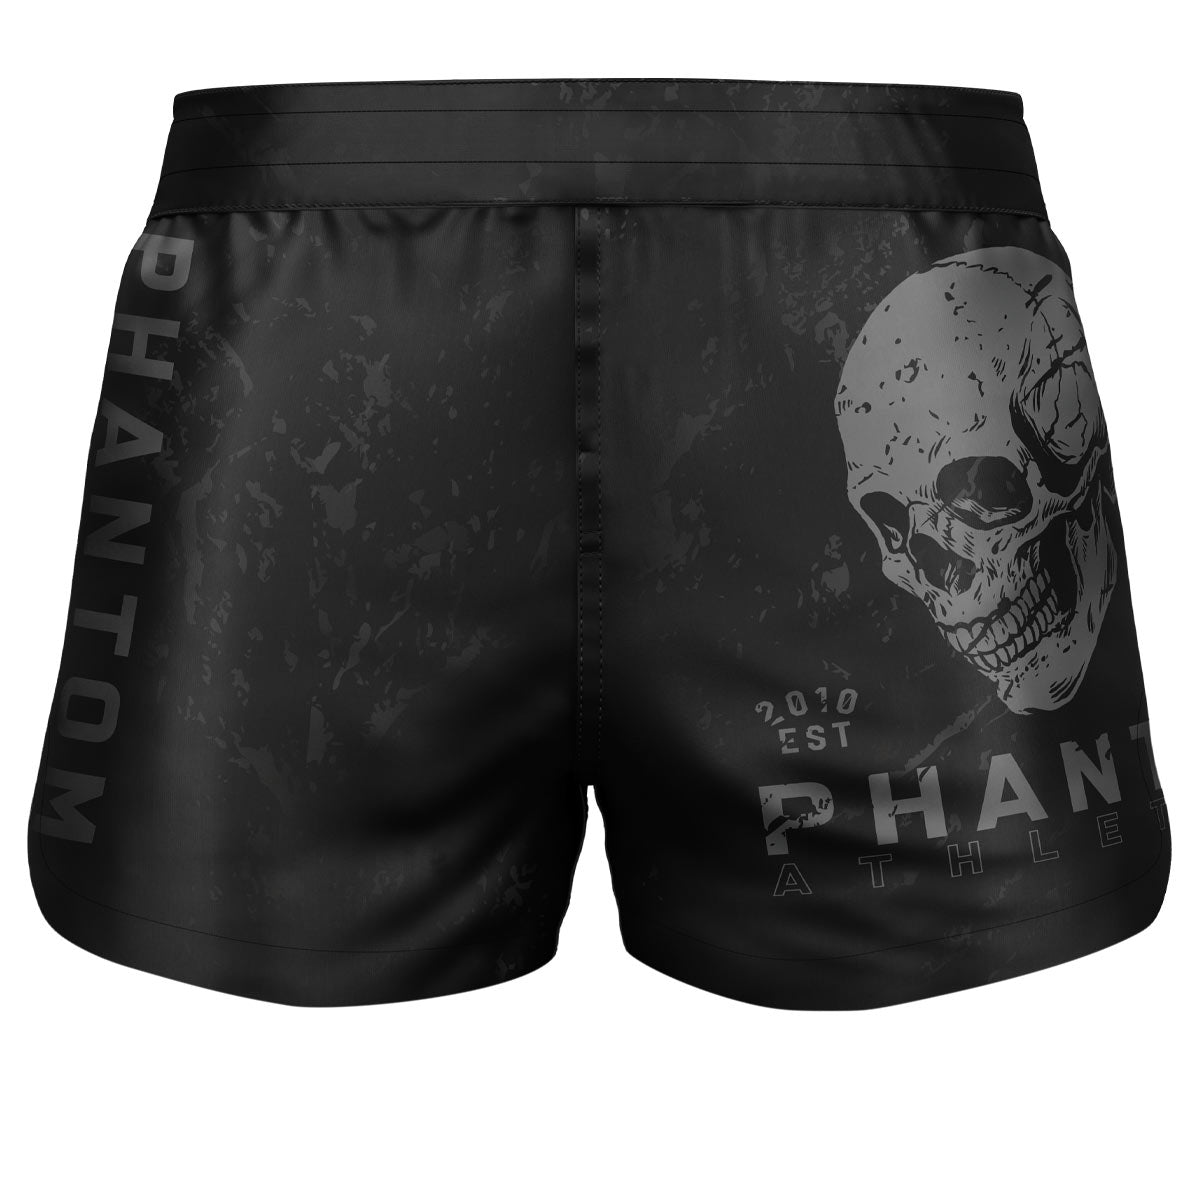 Phantom SKULL fight shorts. The ideal fight shorts for your martial arts. With skull design. Perfect for MMA, Muay Thai, kickboxing, wrestling and grappling.